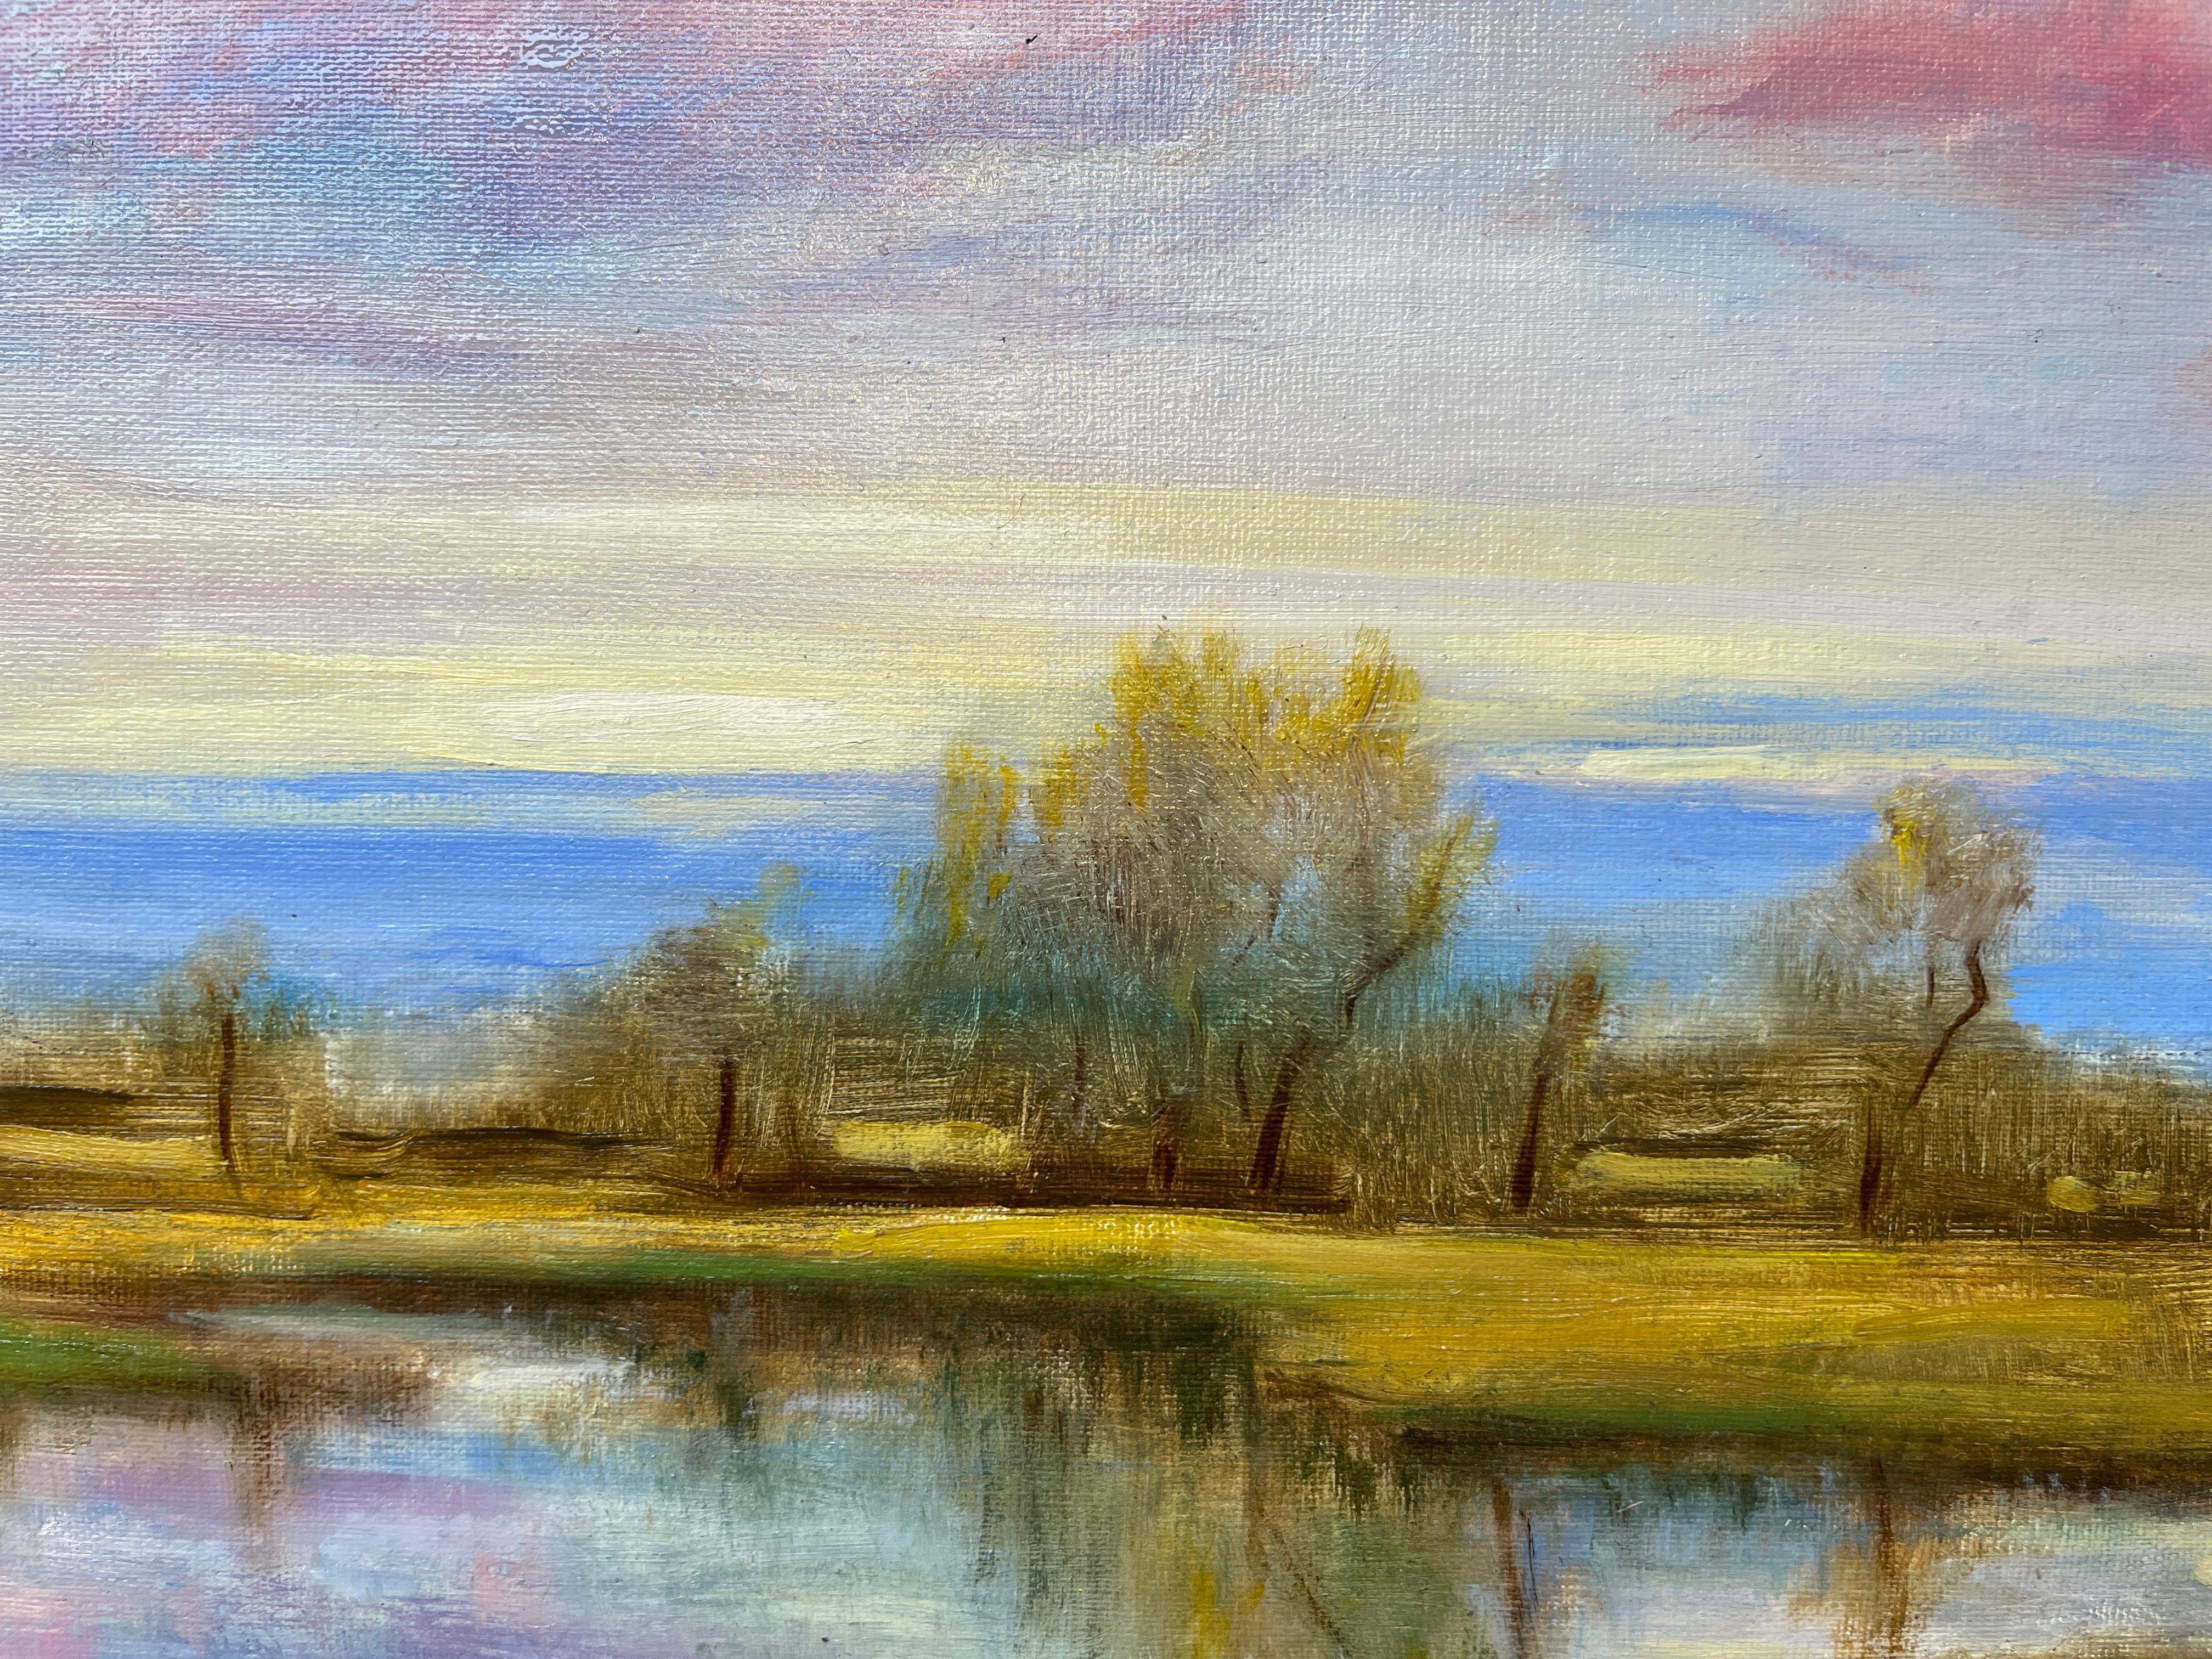 Promise of Spring, Reflective Sky in Pink, Blue, and Gold Tones, Original Oil  1